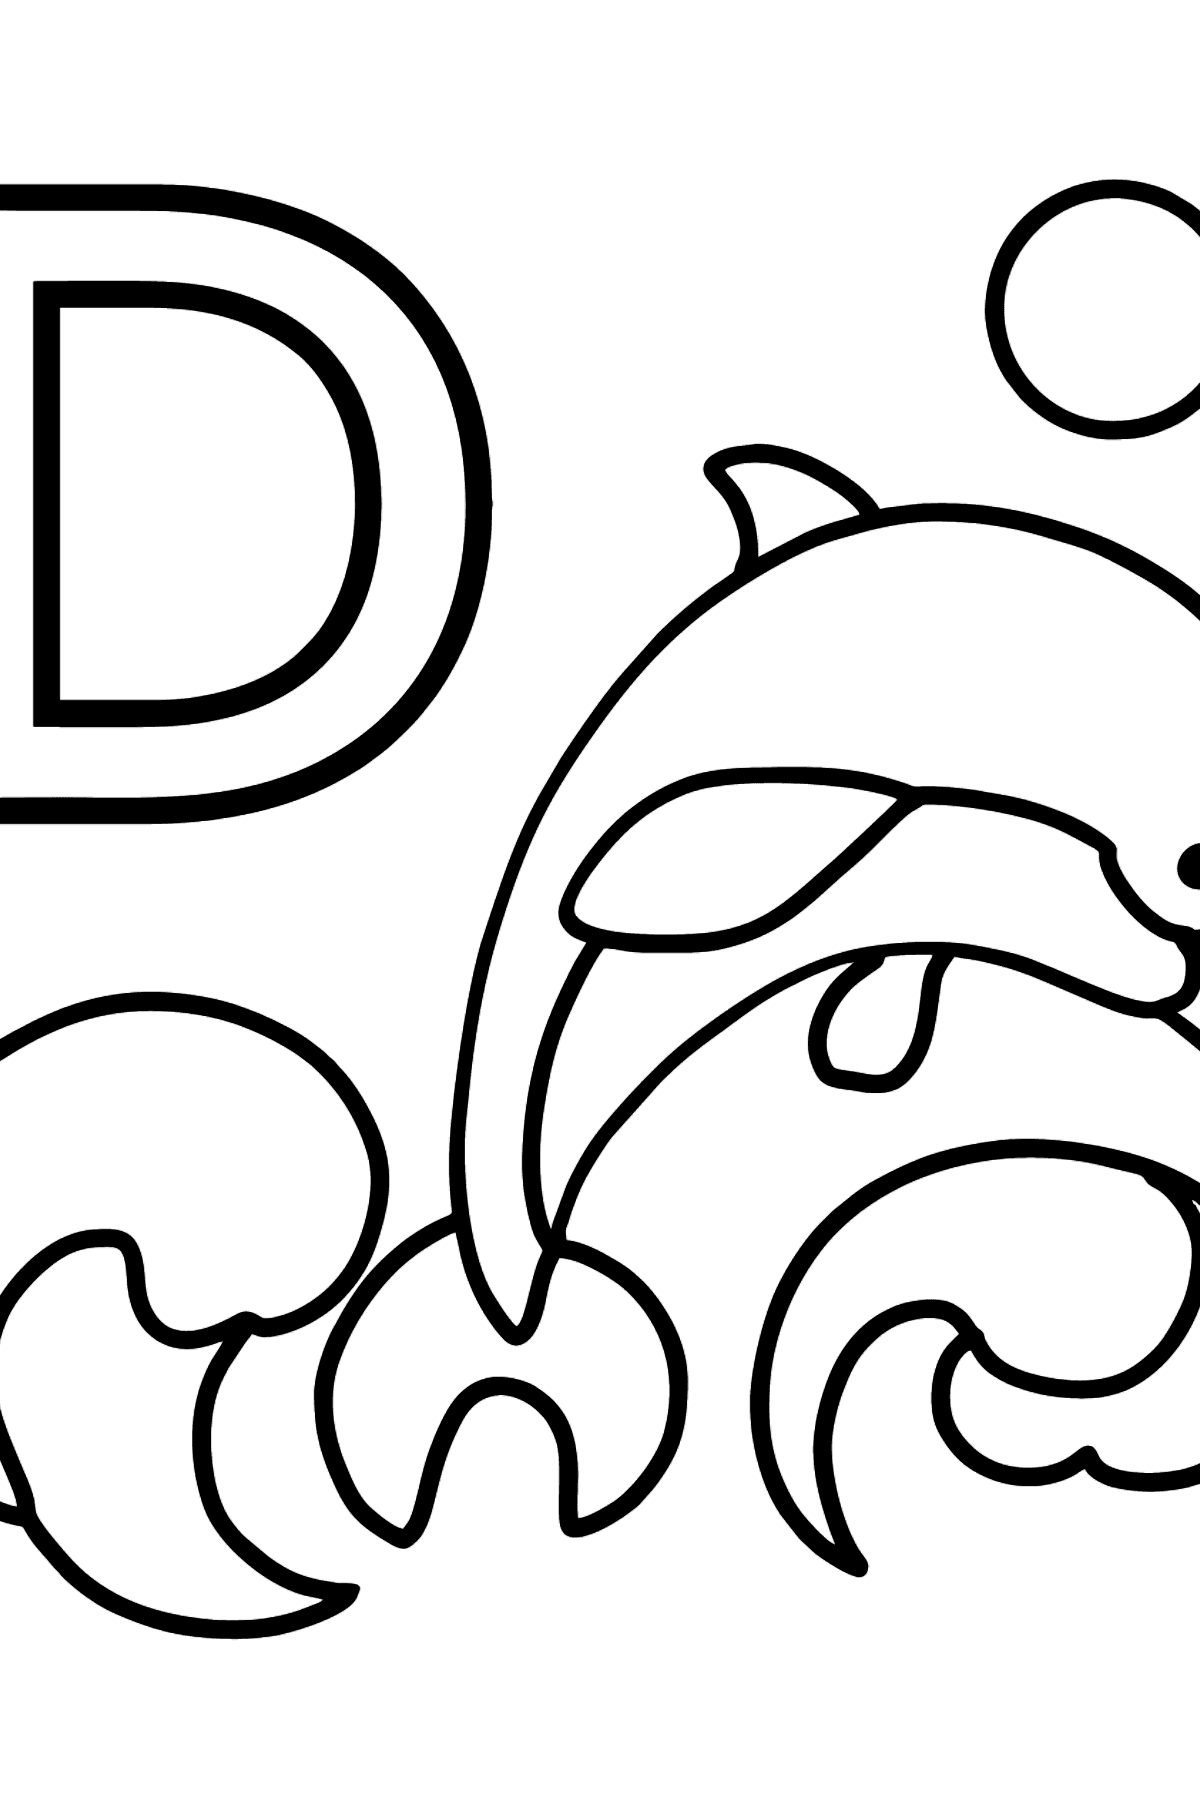 English Letter D coloring pages - DOLPHIN - Coloring Pages for Kids